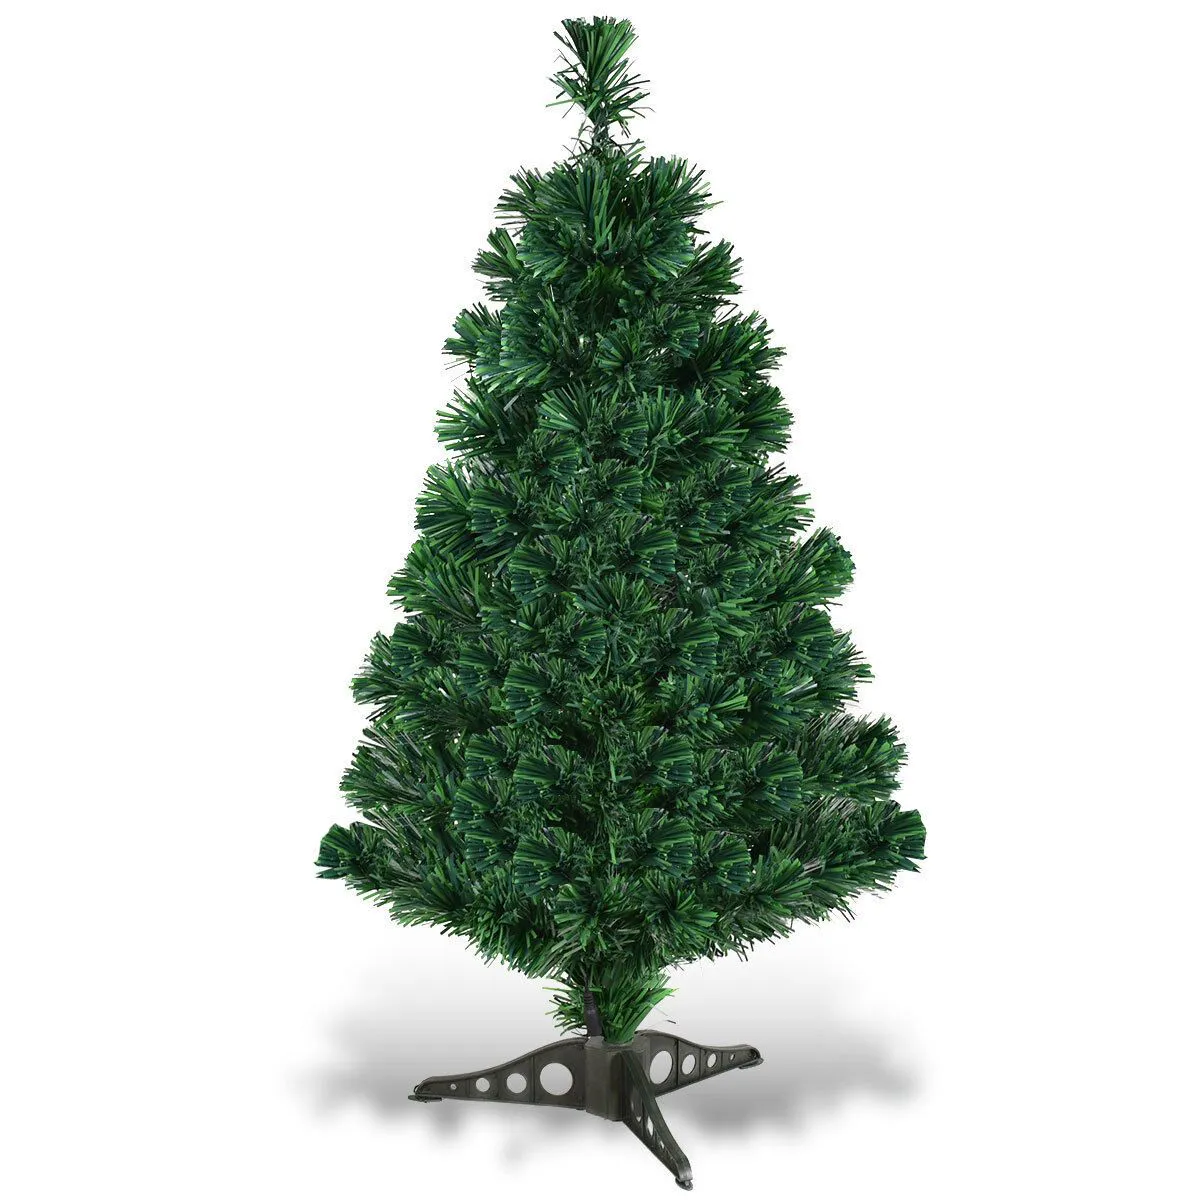 Artificial Fibre Optic Christmas Tree in sizes: 3ft / 4ft / 5ft / 6ft with Stand